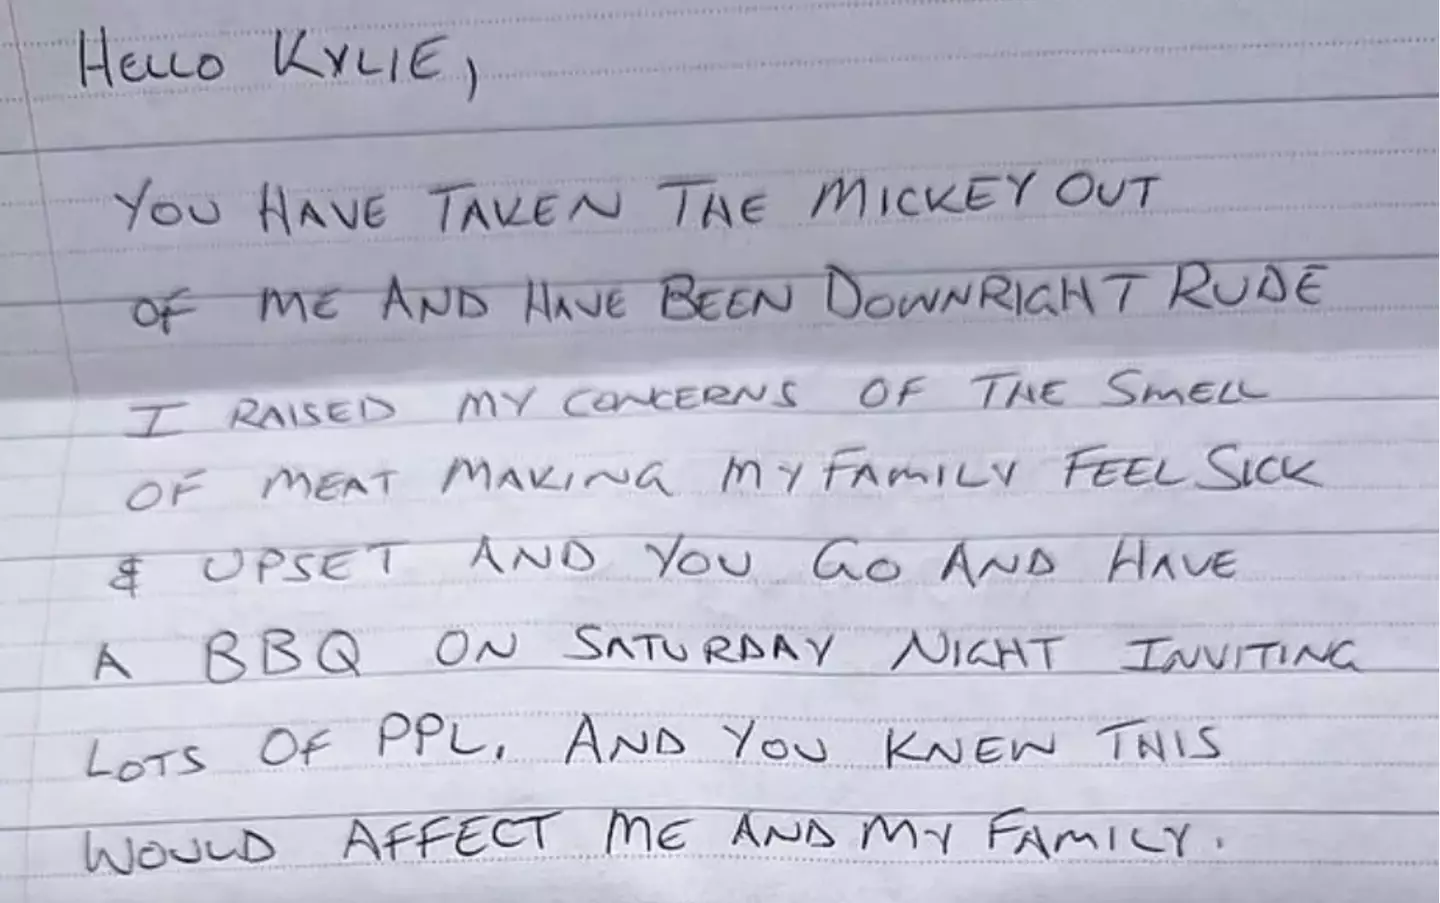 Another letter accused Kylie and her family of 'taking the mickey' with their persistent BBQs.